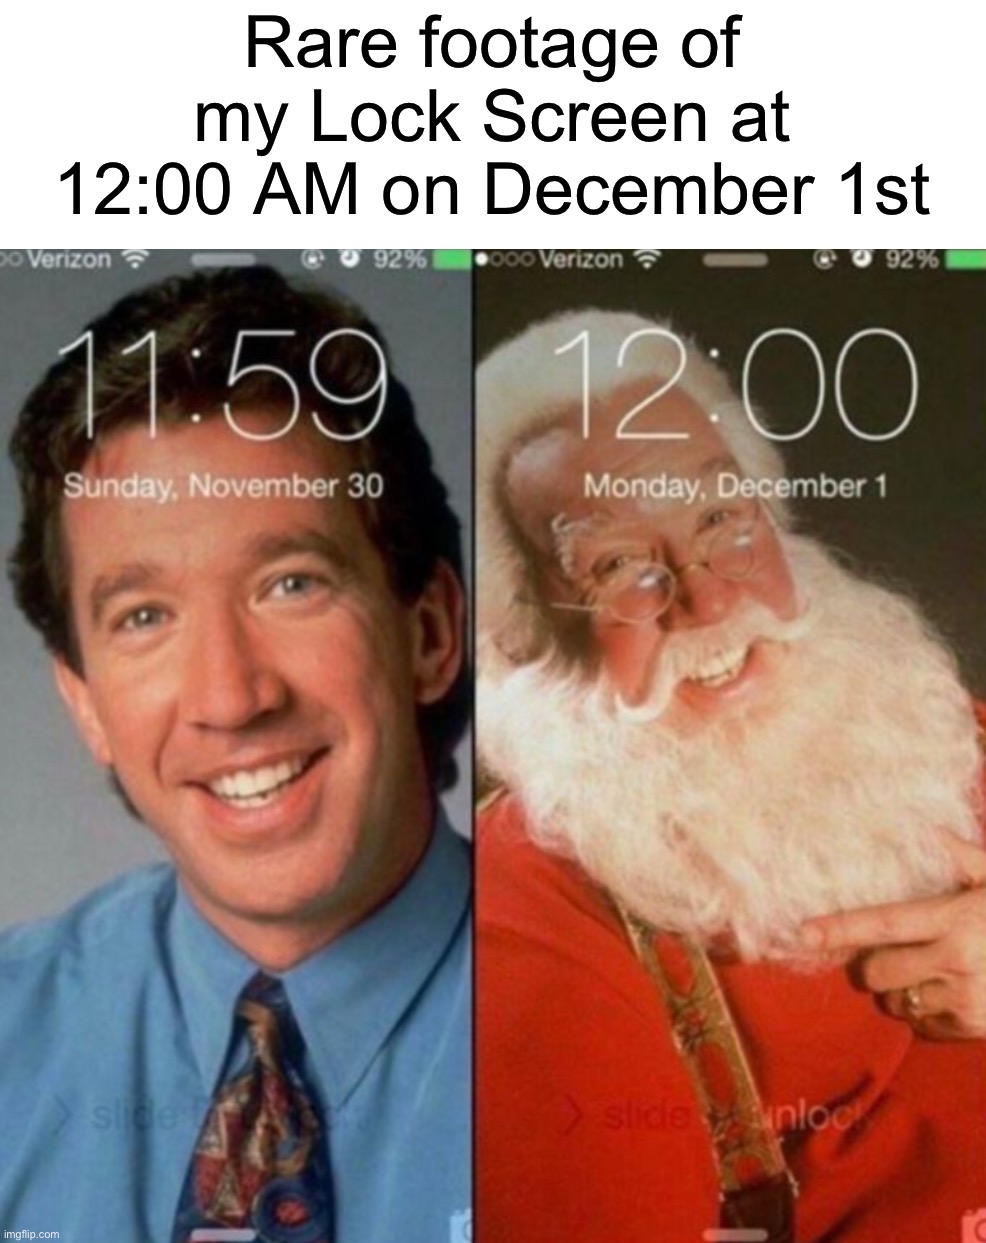 (I didn’t take this photo fyi) |  Rare footage of my Lock Screen at 12:00 AM on December 1st | image tagged in memes,funny,december,christmas,true story,relatable memes | made w/ Imgflip meme maker